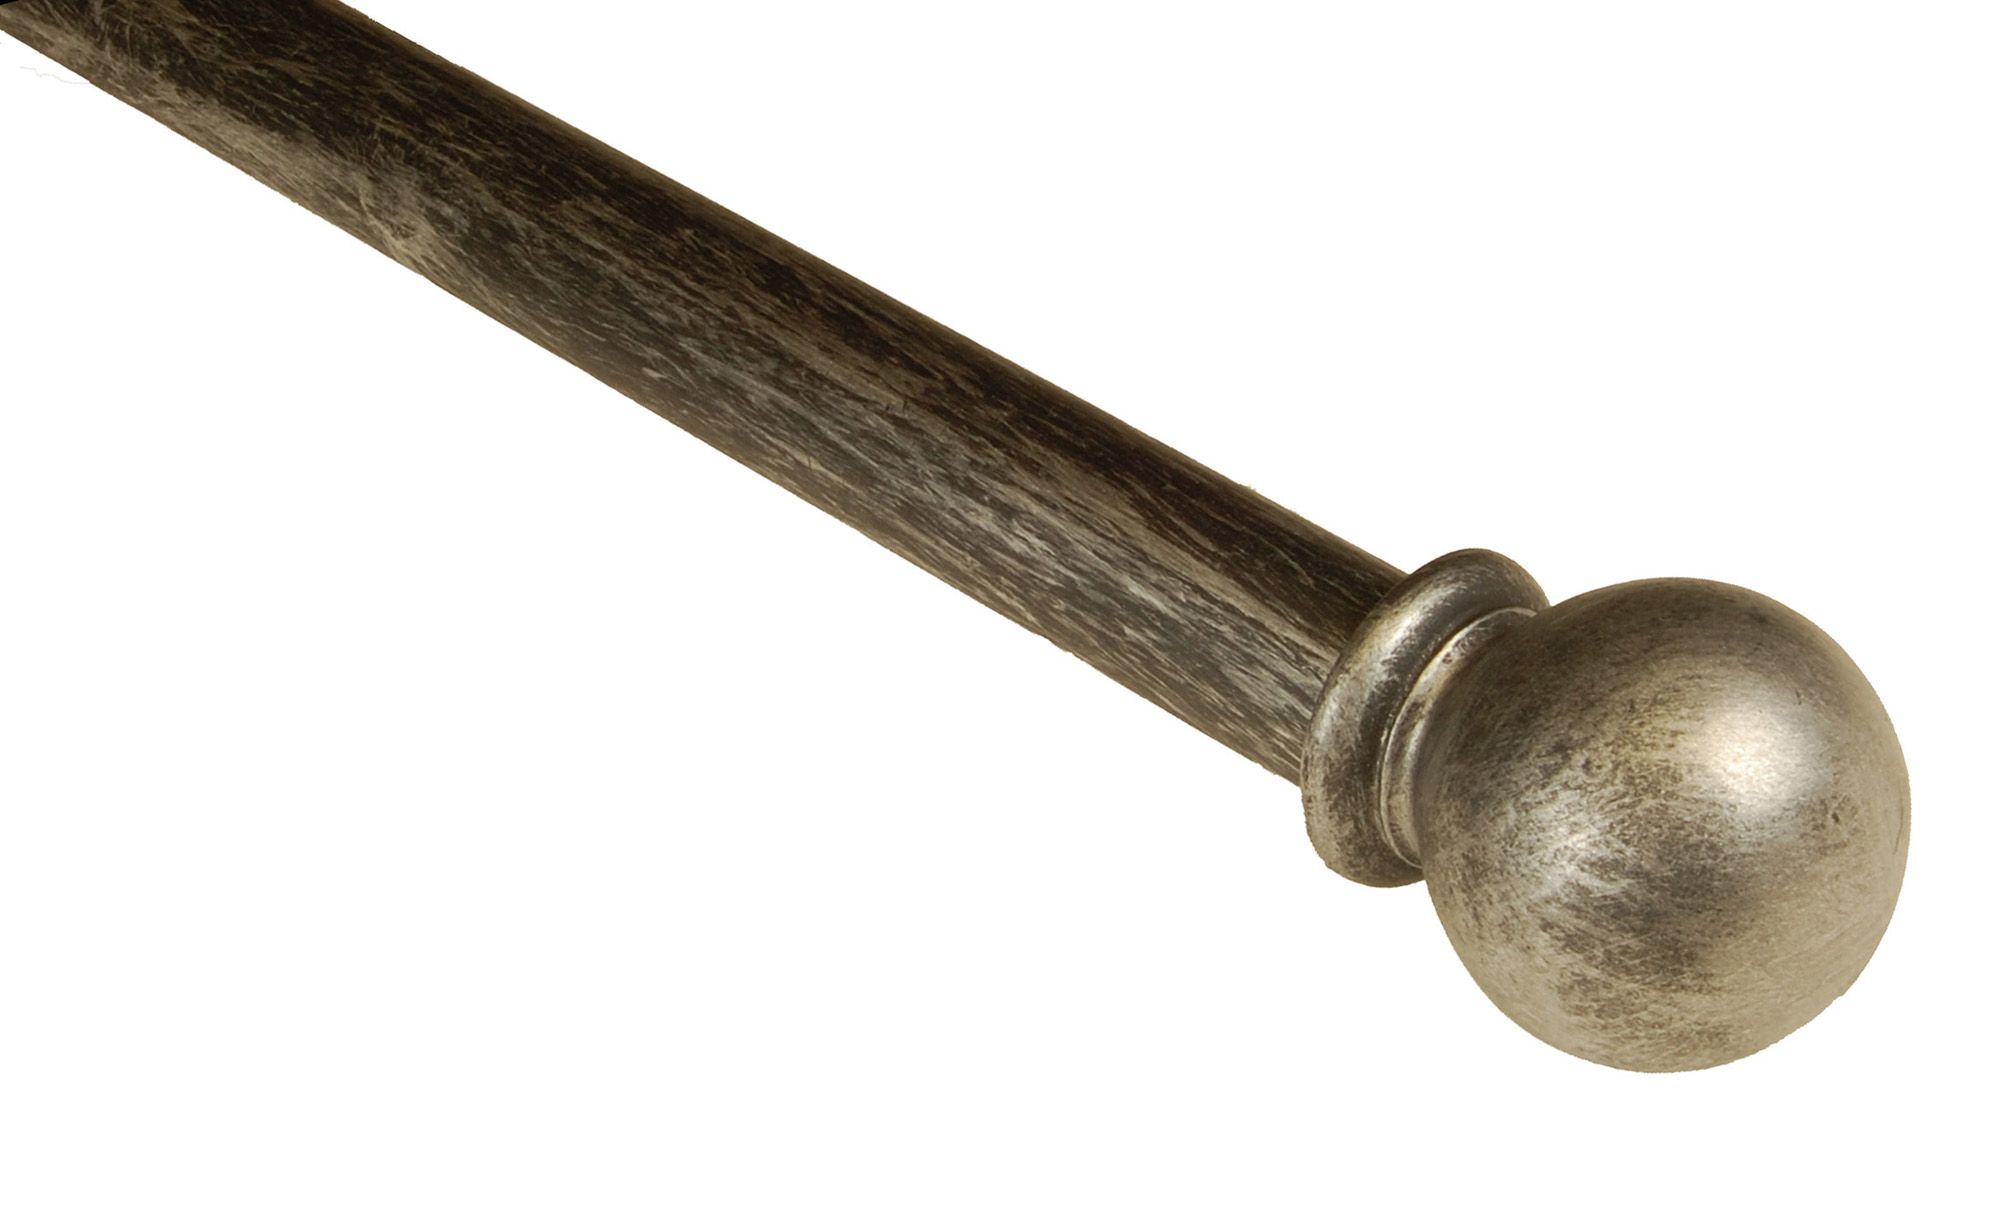 BCL Classic Ball Curtain Rod, Antique Silver Finish, 86-inch to 120-inch, 1.25-inch Diameter Pole